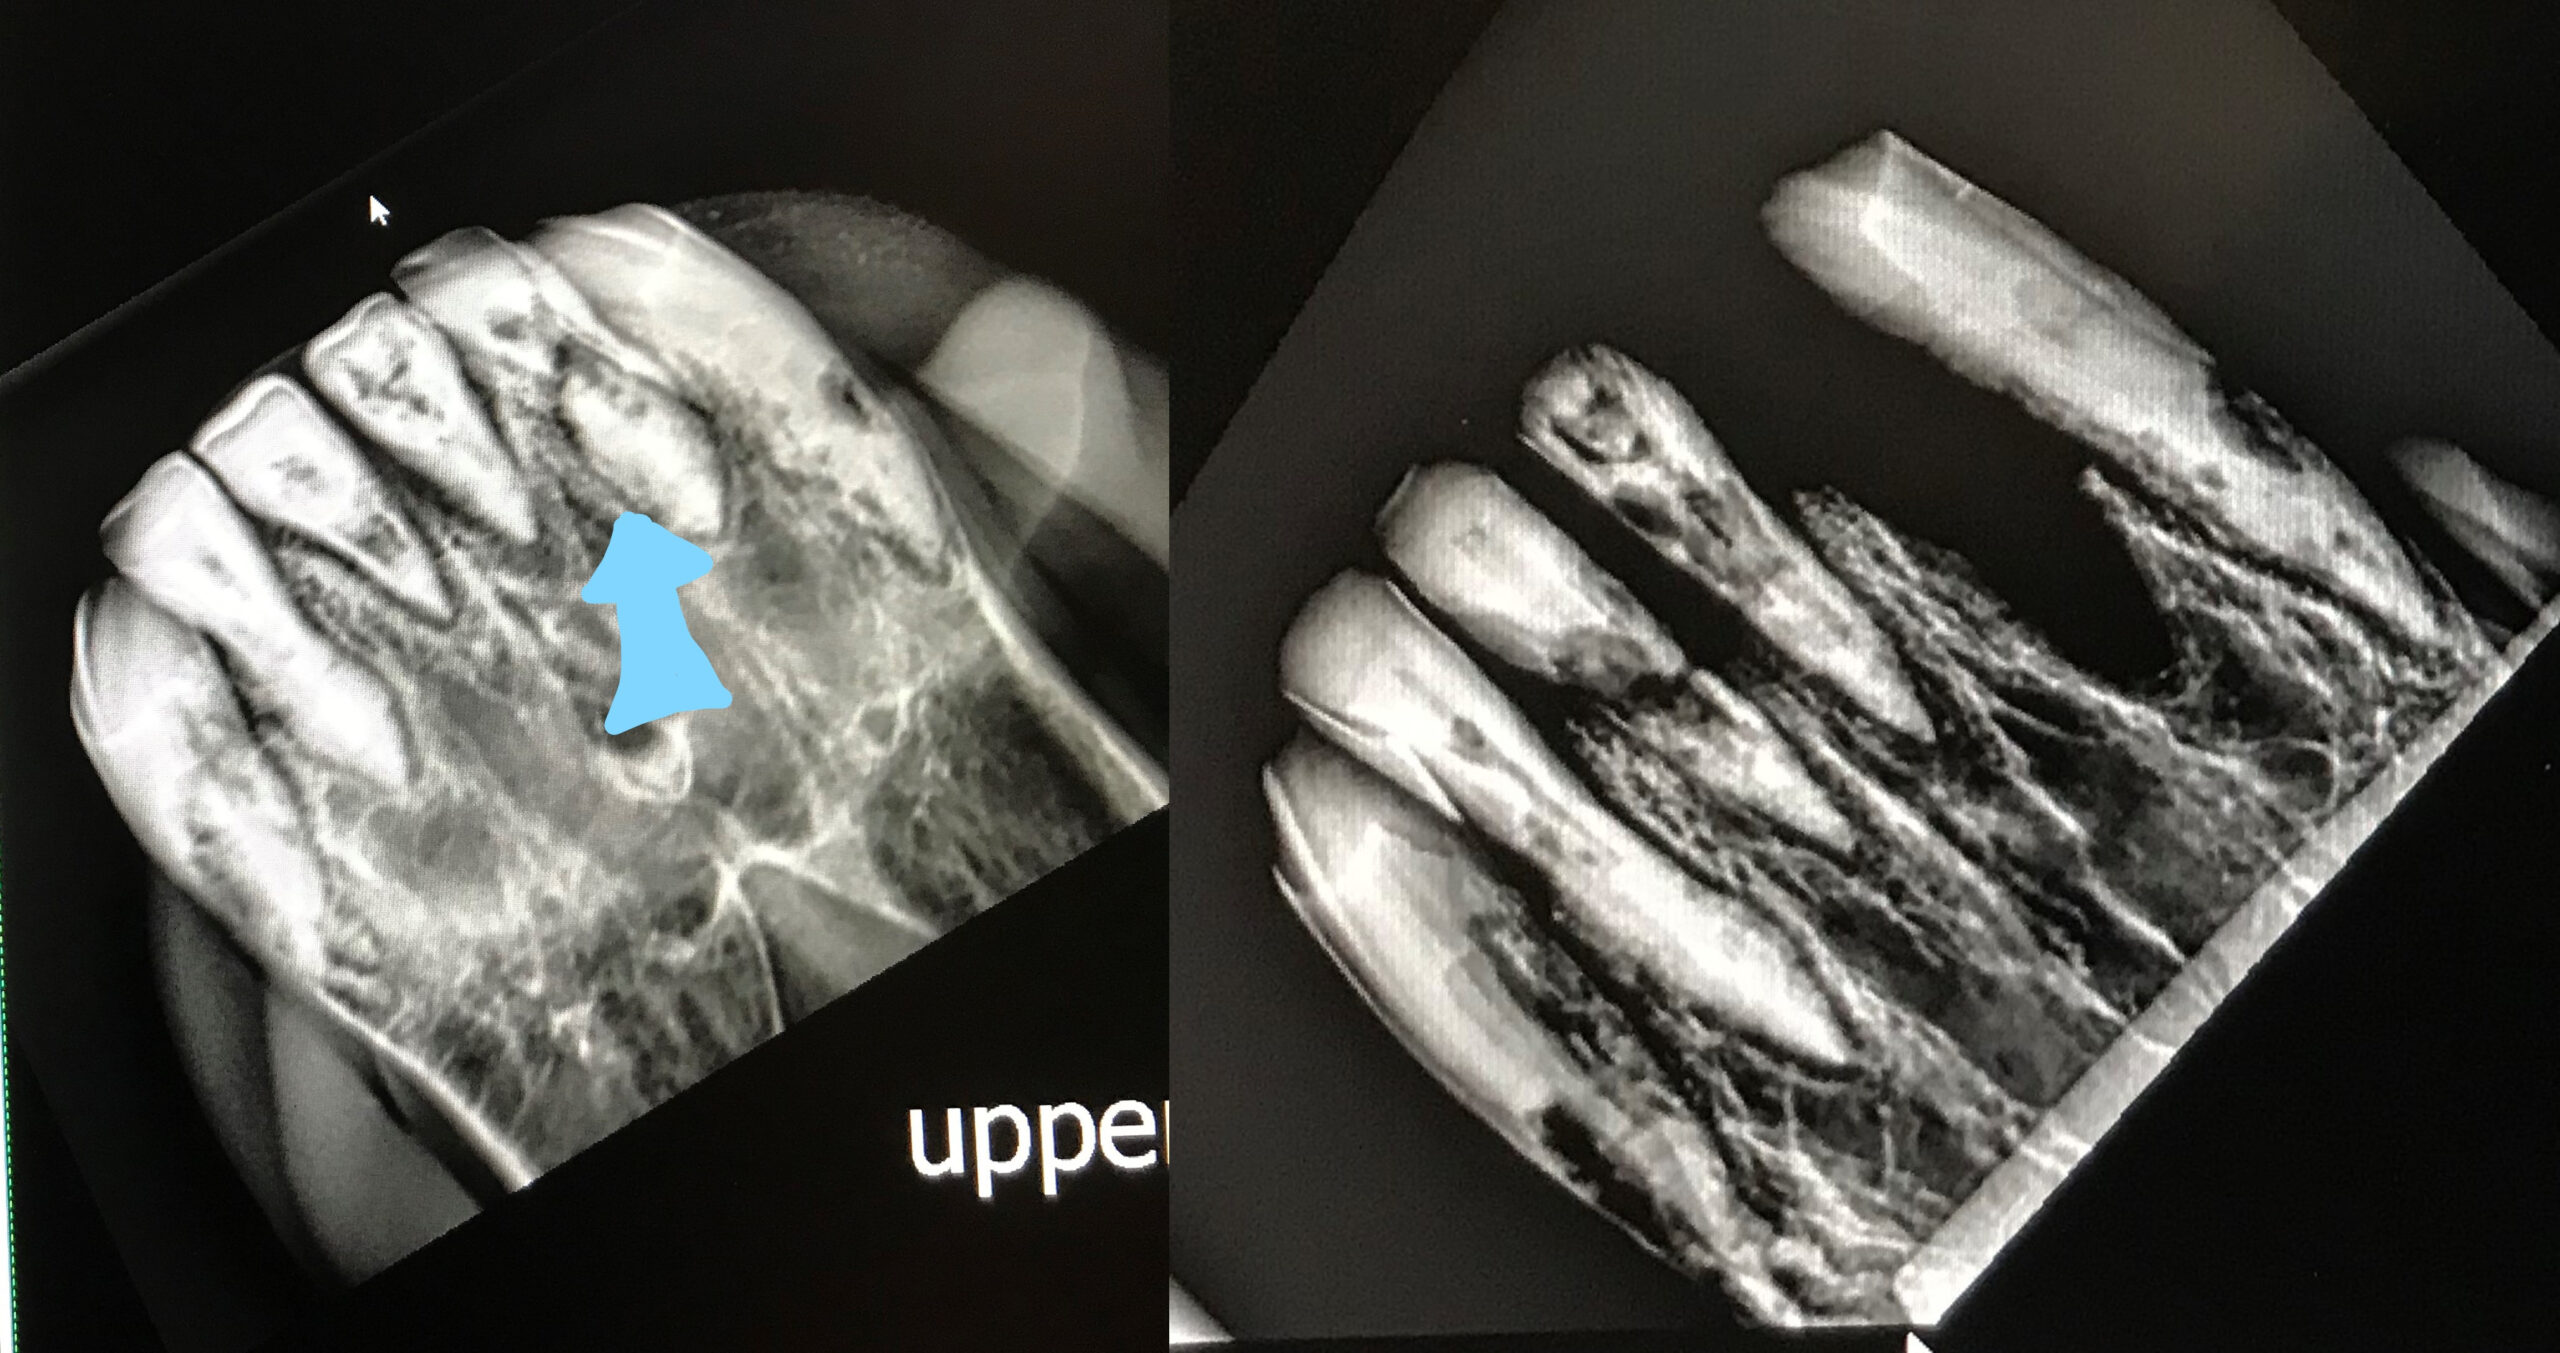 Radiographs showing abnormal tooth roots (pale blue arrow points to fractured tooth) surrounded by irregular bone.  Radiograph on the right shows after one extraction, but other teeth will need extracting too.